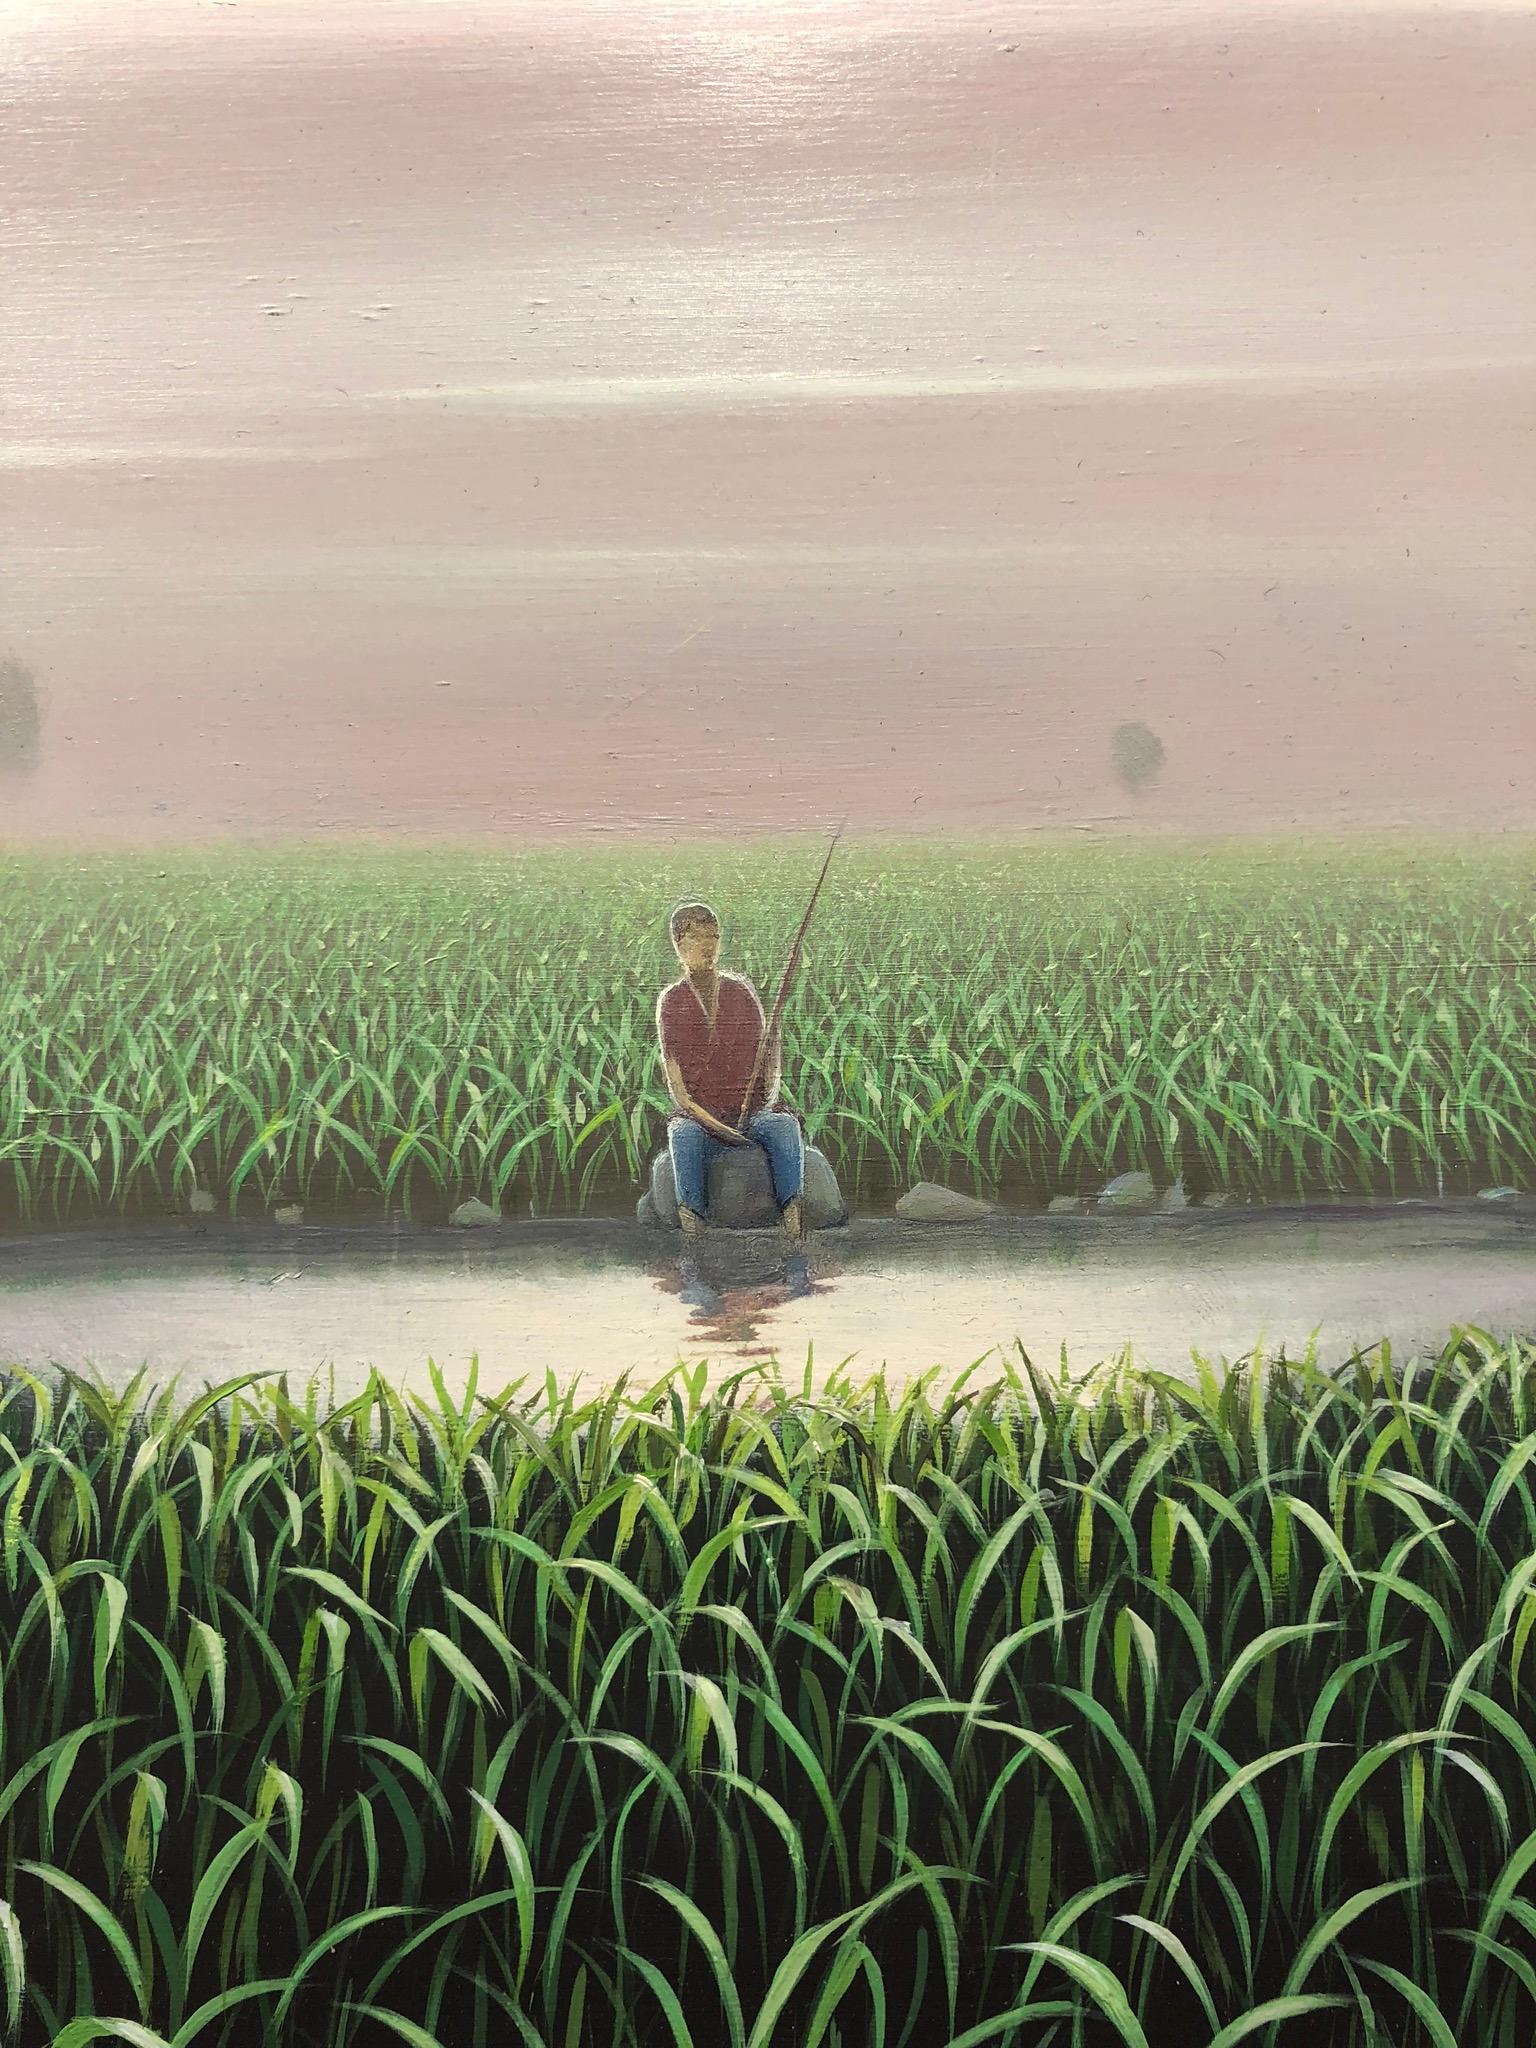 René, Lone Figure Fishing on a Surreal Pond, Small Scale Oil on Panel, Framed - Contemporary Painting by René Monzón Relova “Pozas”